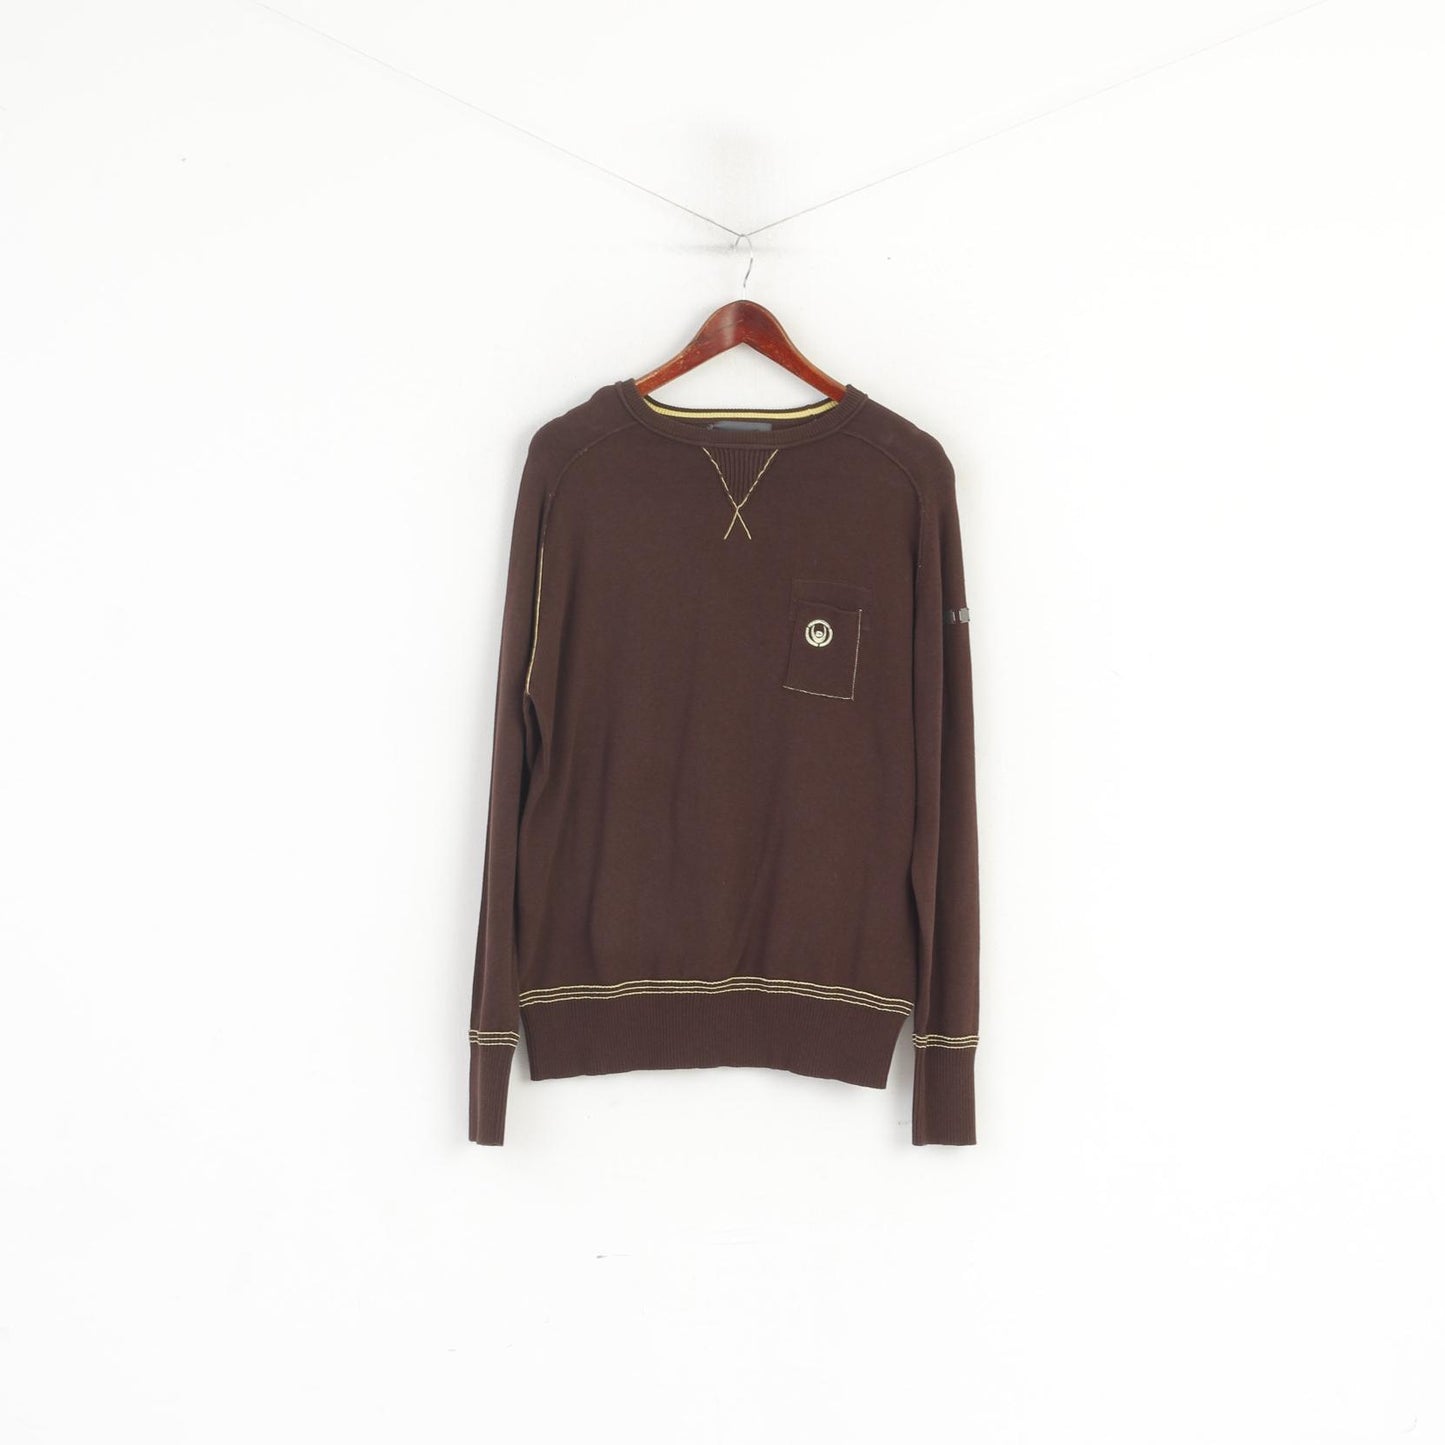 Duck and Cover Men M Jumper Brown Cotton Pocket Classic Plain Sweater